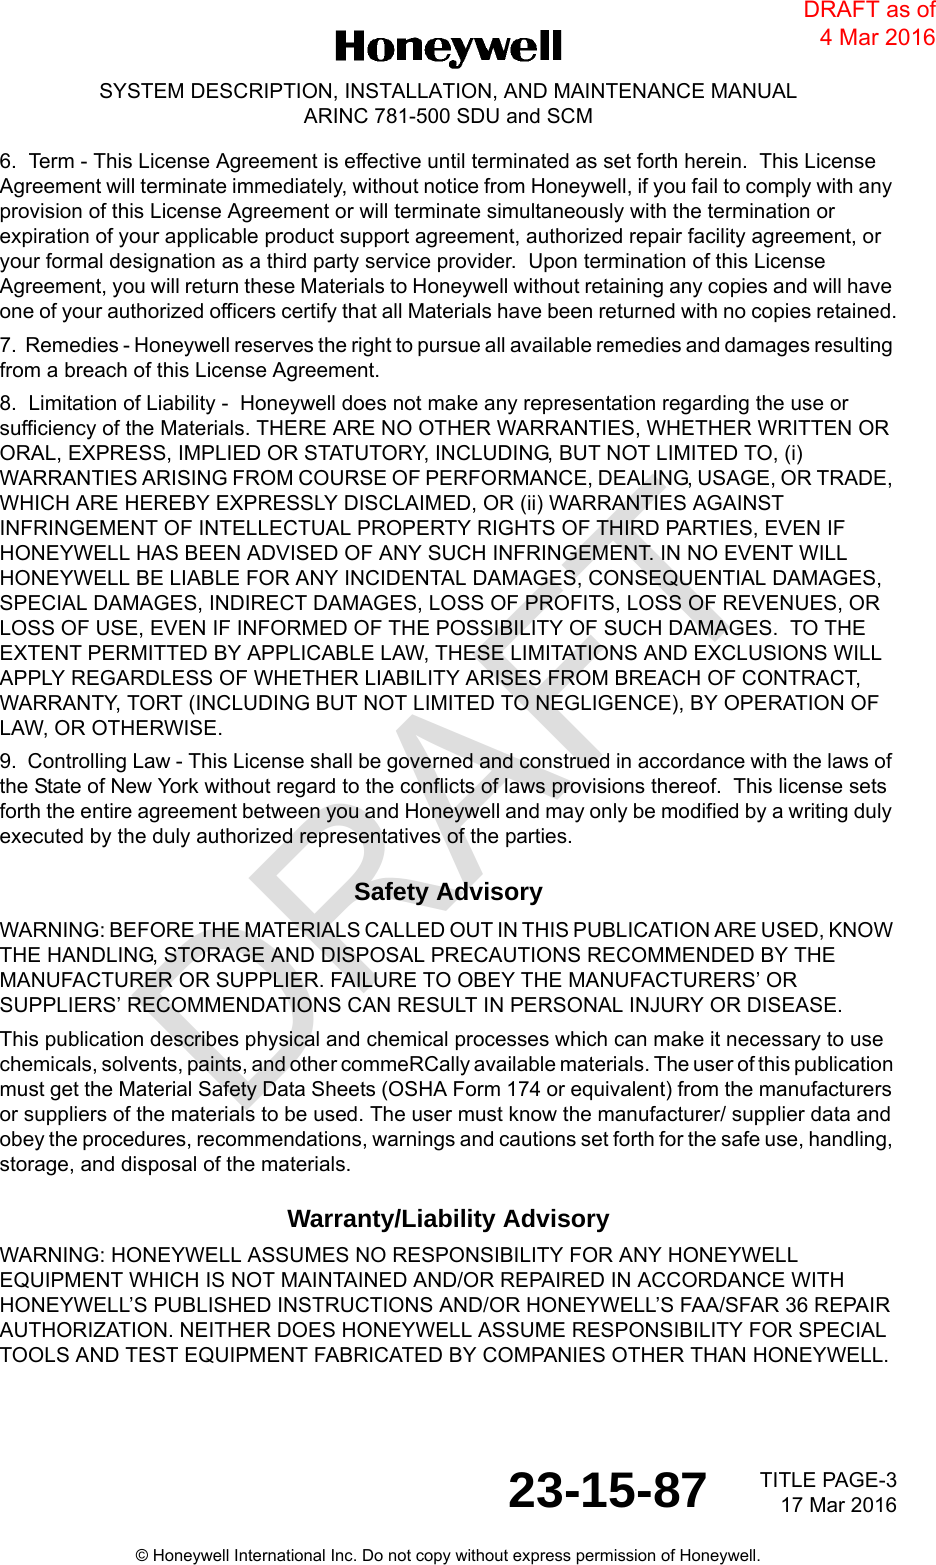 DRAFT TITLE PAGE-3 17 Mar 201623-15-87SYSTEM DESCRIPTION, INSTALLATION, AND MAINTENANCE MANUALARINC 781-500 SDU and SCM© Honeywell International Inc. Do not copy without express permission of Honeywell.6.  Term - This License Agreement is effective until terminated as set forth herein.  This License Agreement will terminate immediately, without notice from Honeywell, if you fail to comply with any provision of this License Agreement or will terminate simultaneously with the termination or expiration of your applicable product support agreement, authorized repair facility agreement, or your formal designation as a third party service provider.  Upon termination of this License Agreement, you will return these Materials to Honeywell without retaining any copies and will have one of your authorized officers certify that all Materials have been returned with no copies retained.7.  Remedies - Honeywell reserves the right to pursue all available remedies and damages resulting from a breach of this License Agreement.8.  Limitation of Liability -  Honeywell does not make any representation regarding the use or sufficiency of the Materials. THERE ARE NO OTHER WARRANTIES, WHETHER WRITTEN OR ORAL, EXPRESS, IMPLIED OR STATUTORY, INCLUDING, BUT NOT LIMITED TO, (i) WARRANTIES ARISING FROM COURSE OF PERFORMANCE, DEALING, USAGE, OR TRADE, WHICH ARE HEREBY EXPRESSLY DISCLAIMED, OR (ii) WARRANTIES AGAINST INFRINGEMENT OF INTELLECTUAL PROPERTY RIGHTS OF THIRD PARTIES, EVEN IF HONEYWELL HAS BEEN ADVISED OF ANY SUCH INFRINGEMENT. IN NO EVENT WILL HONEYWELL BE LIABLE FOR ANY INCIDENTAL DAMAGES, CONSEQUENTIAL DAMAGES, SPECIAL DAMAGES, INDIRECT DAMAGES, LOSS OF PROFITS, LOSS OF REVENUES, OR LOSS OF USE, EVEN IF INFORMED OF THE POSSIBILITY OF SUCH DAMAGES.  TO THE EXTENT PERMITTED BY APPLICABLE LAW, THESE LIMITATIONS AND EXCLUSIONS WILL APPLY REGARDLESS OF WHETHER LIABILITY ARISES FROM BREACH OF CONTRACT, WARRANTY, TORT (INCLUDING BUT NOT LIMITED TO NEGLIGENCE), BY OPERATION OF LAW, OR OTHERWISE.9.  Controlling Law - This License shall be governed and construed in accordance with the laws of the State of New York without regard to the conflicts of laws provisions thereof.  This license sets forth the entire agreement between you and Honeywell and may only be modified by a writing duly executed by the duly authorized representatives of the parties.Safety AdvisoryWARNING: BEFORE THE MATERIALS CALLED OUT IN THIS PUBLICATION ARE USED, KNOW THE HANDLING, STORAGE AND DISPOSAL PRECAUTIONS RECOMMENDED BY THE MANUFACTURER OR SUPPLIER. FAILURE TO OBEY THE MANUFACTURERS’ OR SUPPLIERS’ RECOMMENDATIONS CAN RESULT IN PERSONAL INJURY OR DISEASE.This publication describes physical and chemical processes which can make it necessary to use chemicals, solvents, paints, and other commeRCally available materials. The user of this publication must get the Material Safety Data Sheets (OSHA Form 174 or equivalent) from the manufacturers or suppliers of the materials to be used. The user must know the manufacturer/ supplier data and obey the procedures, recommendations, warnings and cautions set forth for the safe use, handling, storage, and disposal of the materials.Warranty/Liability AdvisoryWARNING: HONEYWELL ASSUMES NO RESPONSIBILITY FOR ANY HONEYWELL EQUIPMENT WHICH IS NOT MAINTAINED AND/OR REPAIRED IN ACCORDANCE WITH HONEYWELL’S PUBLISHED INSTRUCTIONS AND/OR HONEYWELL’S FAA/SFAR 36 REPAIR AUTHORIZATION. NEITHER DOES HONEYWELL ASSUME RESPONSIBILITY FOR SPECIAL TOOLS AND TEST EQUIPMENT FABRICATED BY COMPANIES OTHER THAN HONEYWELL.DRAFT as of 4 Mar 2016